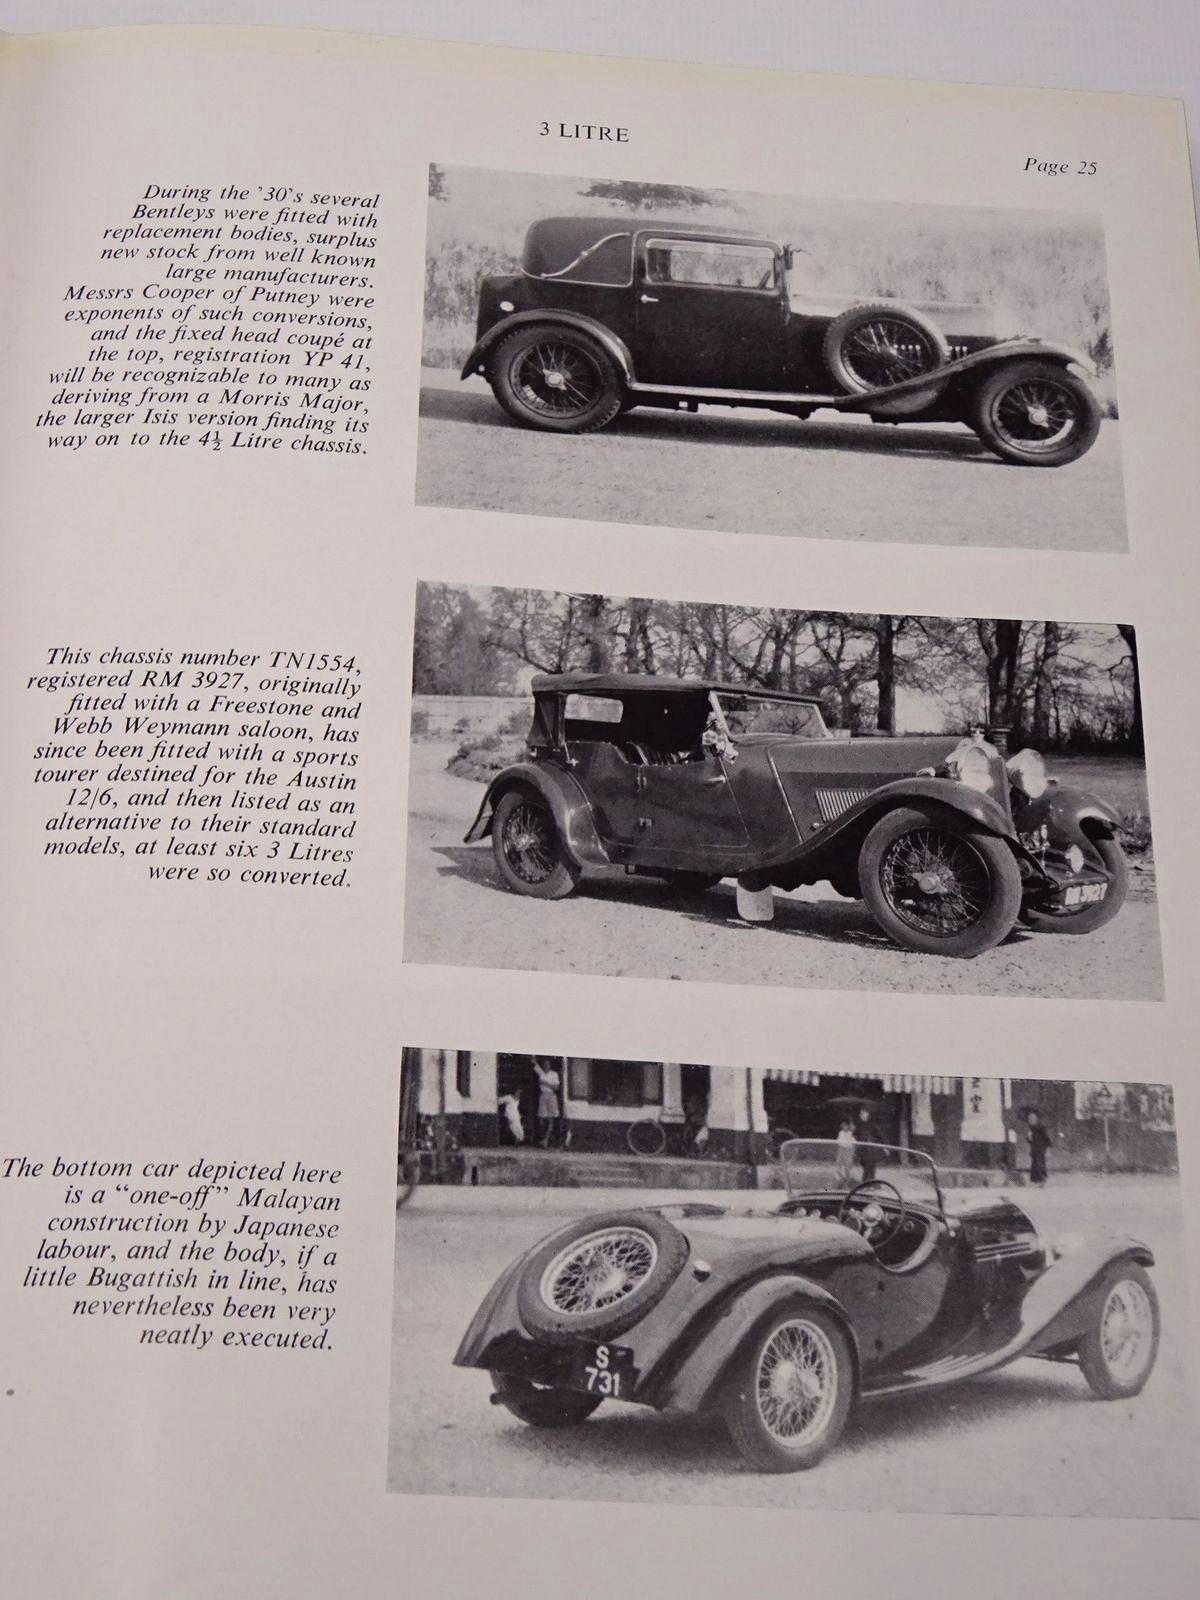 Photo of BENTLEY FIFTY YEARS OF THE MARQUE written by Green, Johnnie published by Dalton Watson (STOCK CODE: 1817371)  for sale by Stella & Rose's Books